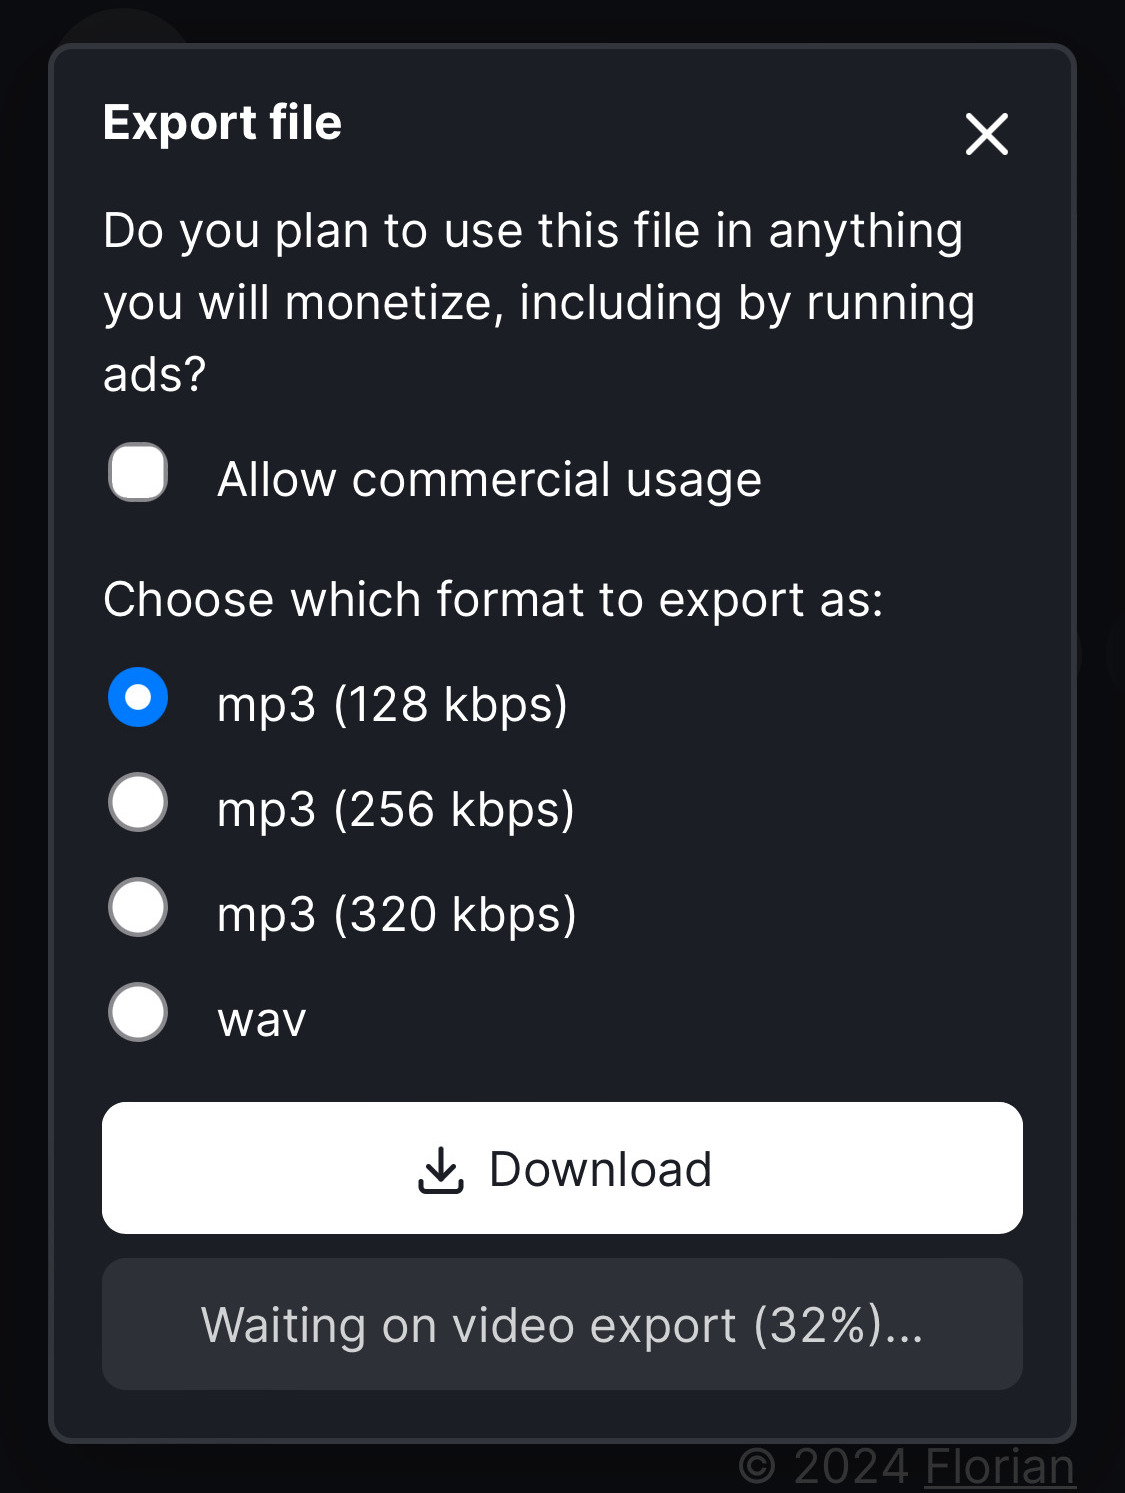 Screenshot of the Audapt export prompt with a Download button followed by a disabled button labeled Waiting on video export (32%)